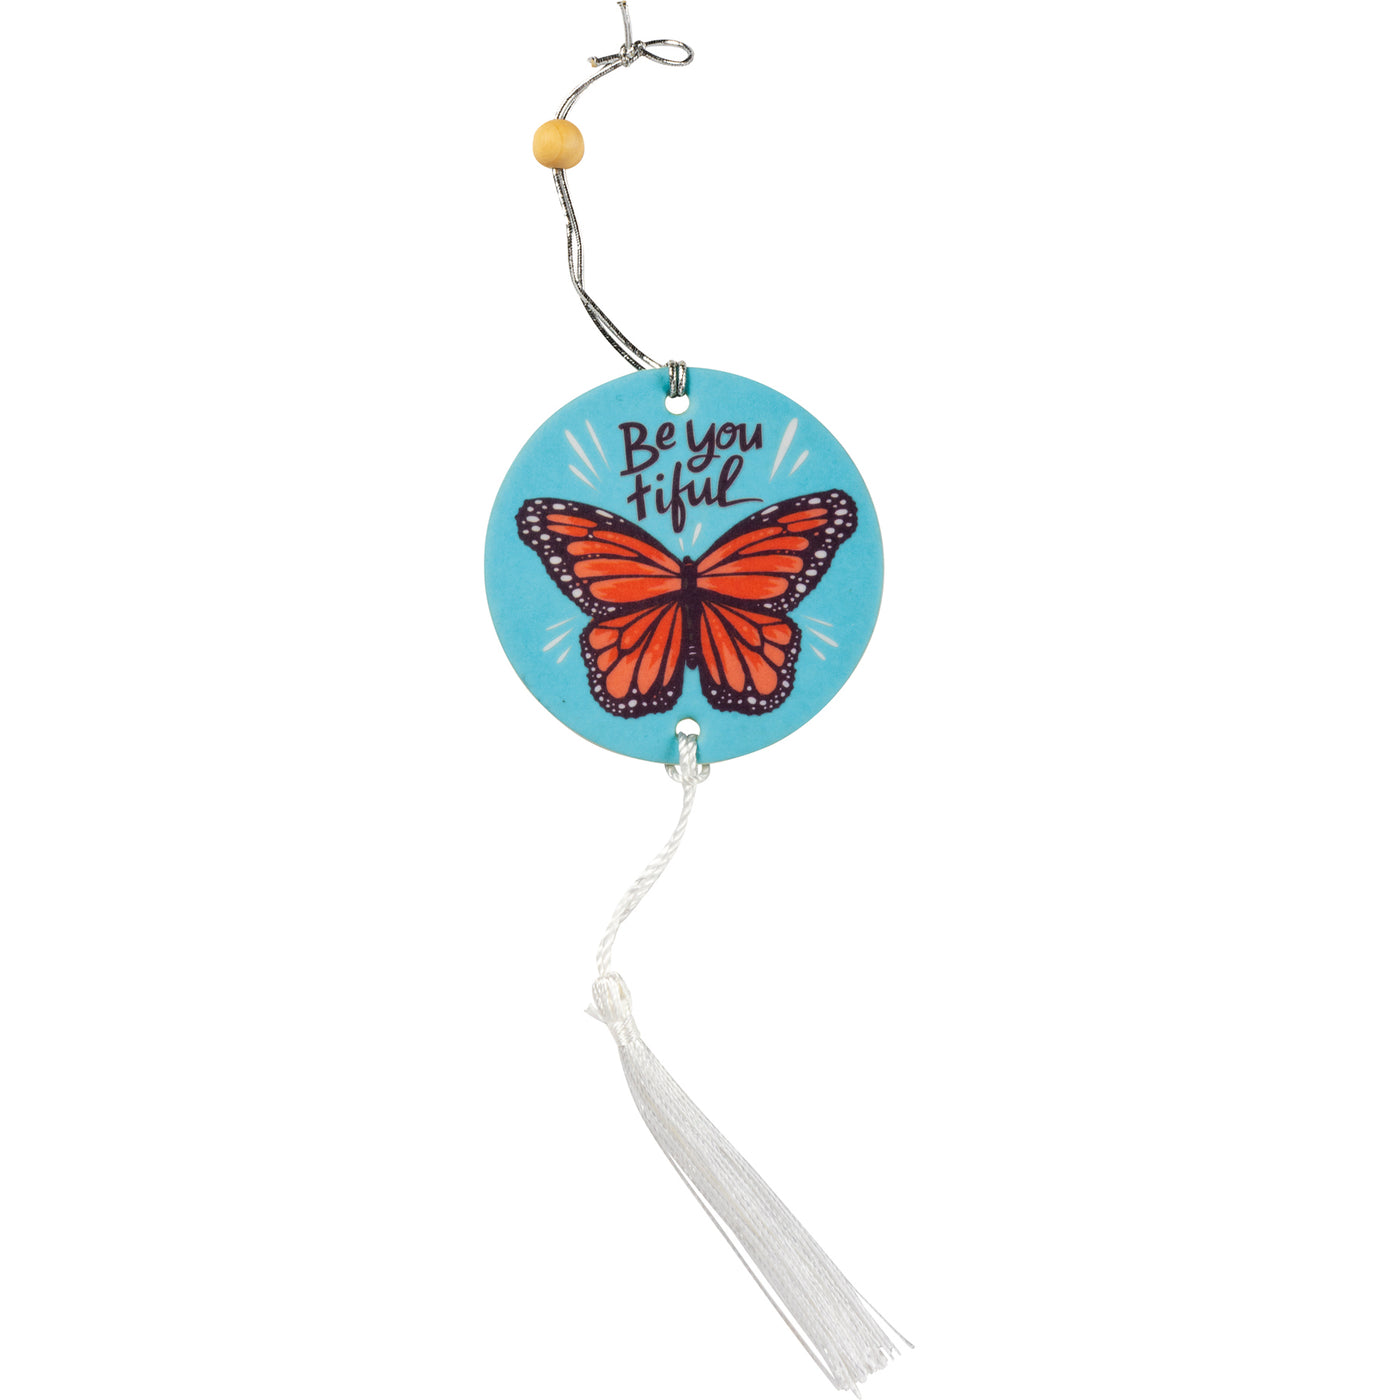 Surprise Me Sale 🤭 Be You Tiful Butterfly Air Freshener Set of 2